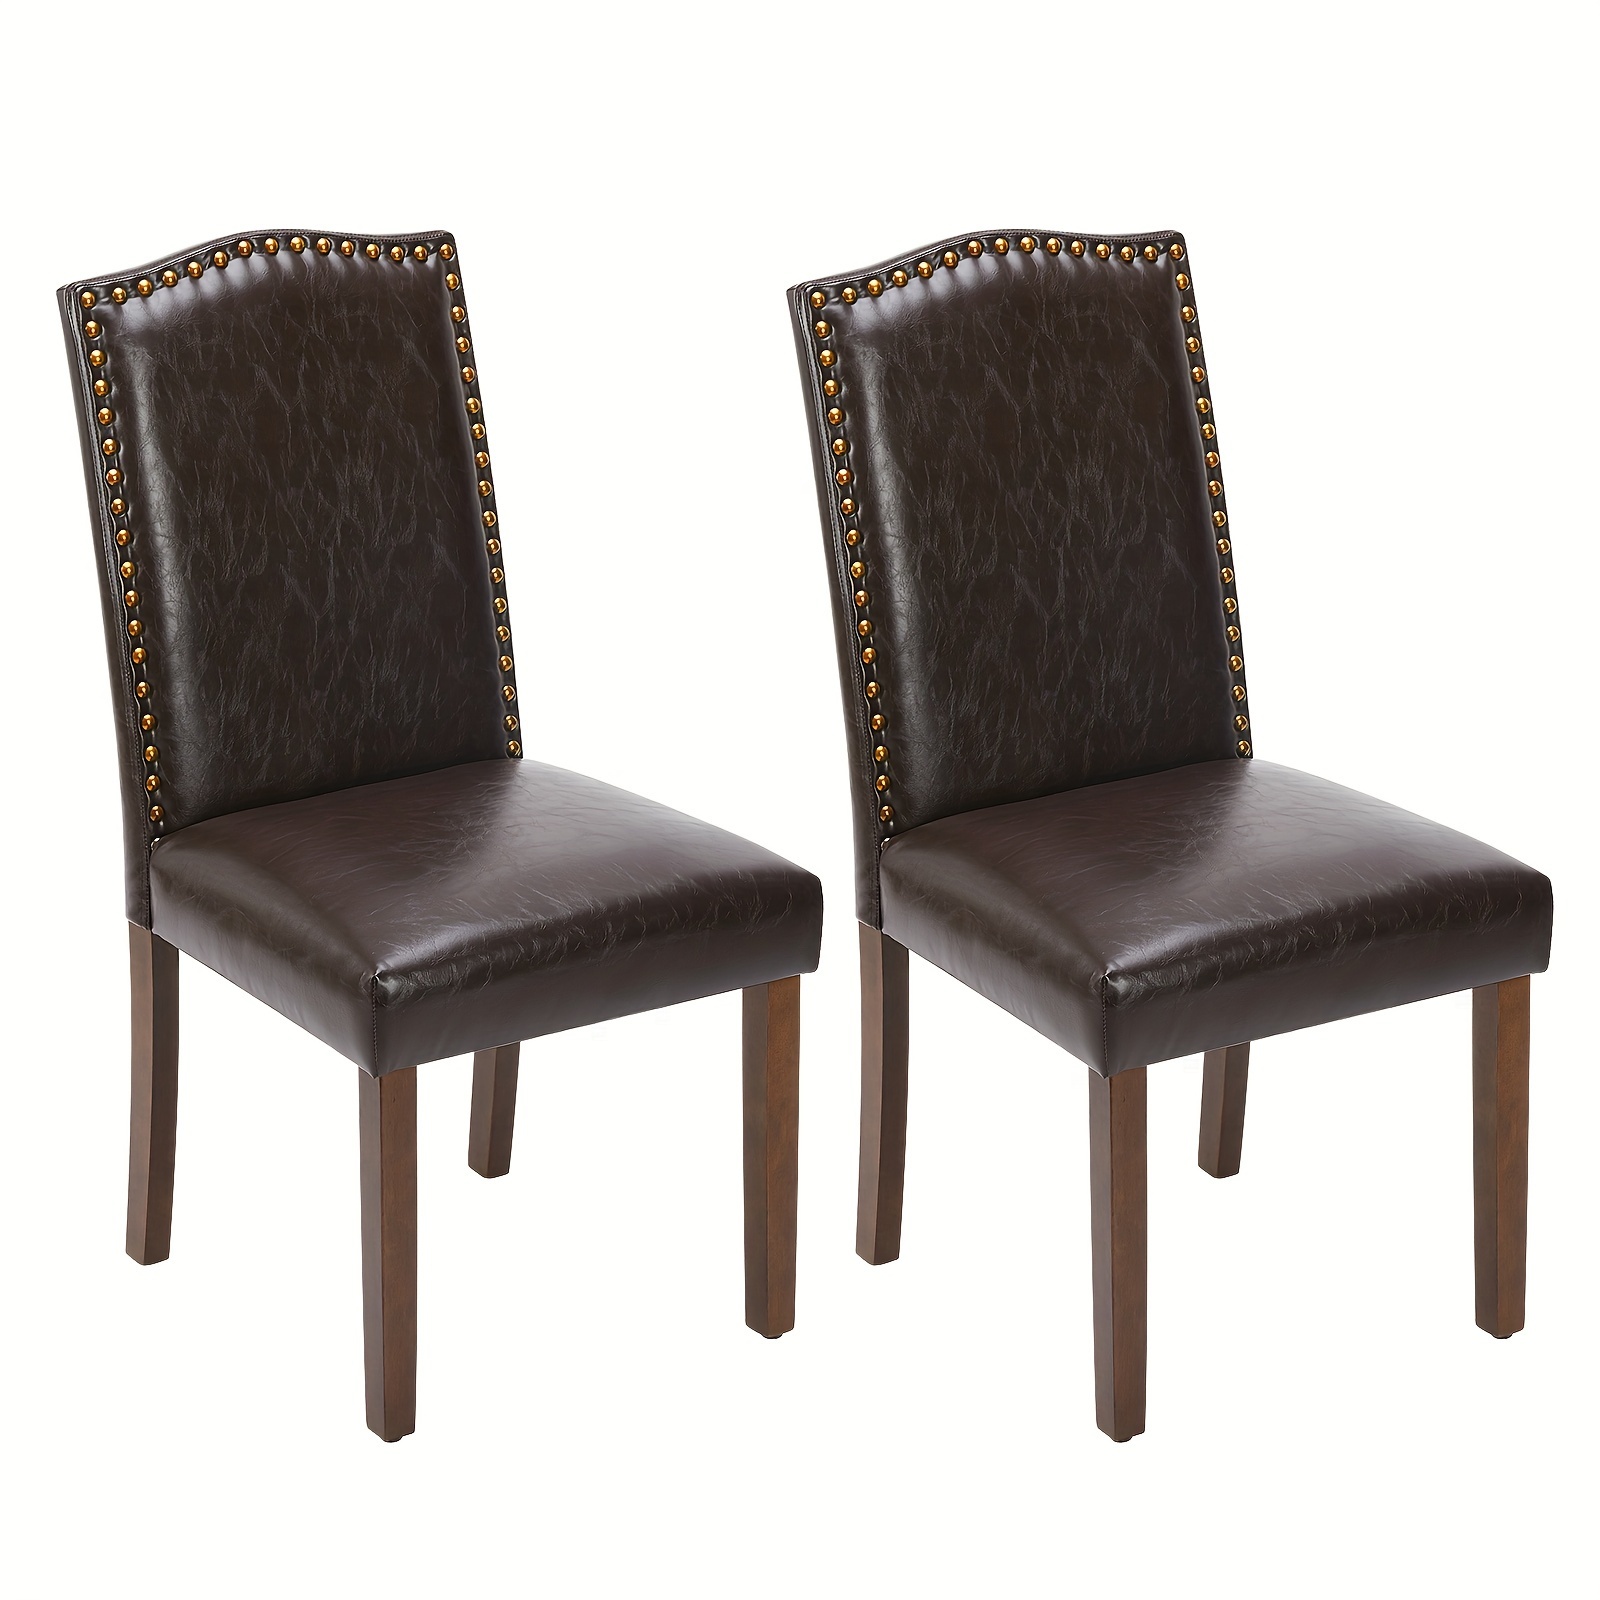 

Dining Chairs Set Of 2, Modern Upholstered High-end Dining Room Chair With Nailhead Back And Solid Wood Legs, Fabric Side Chairs For Dining Table, Kitchen, Living Room